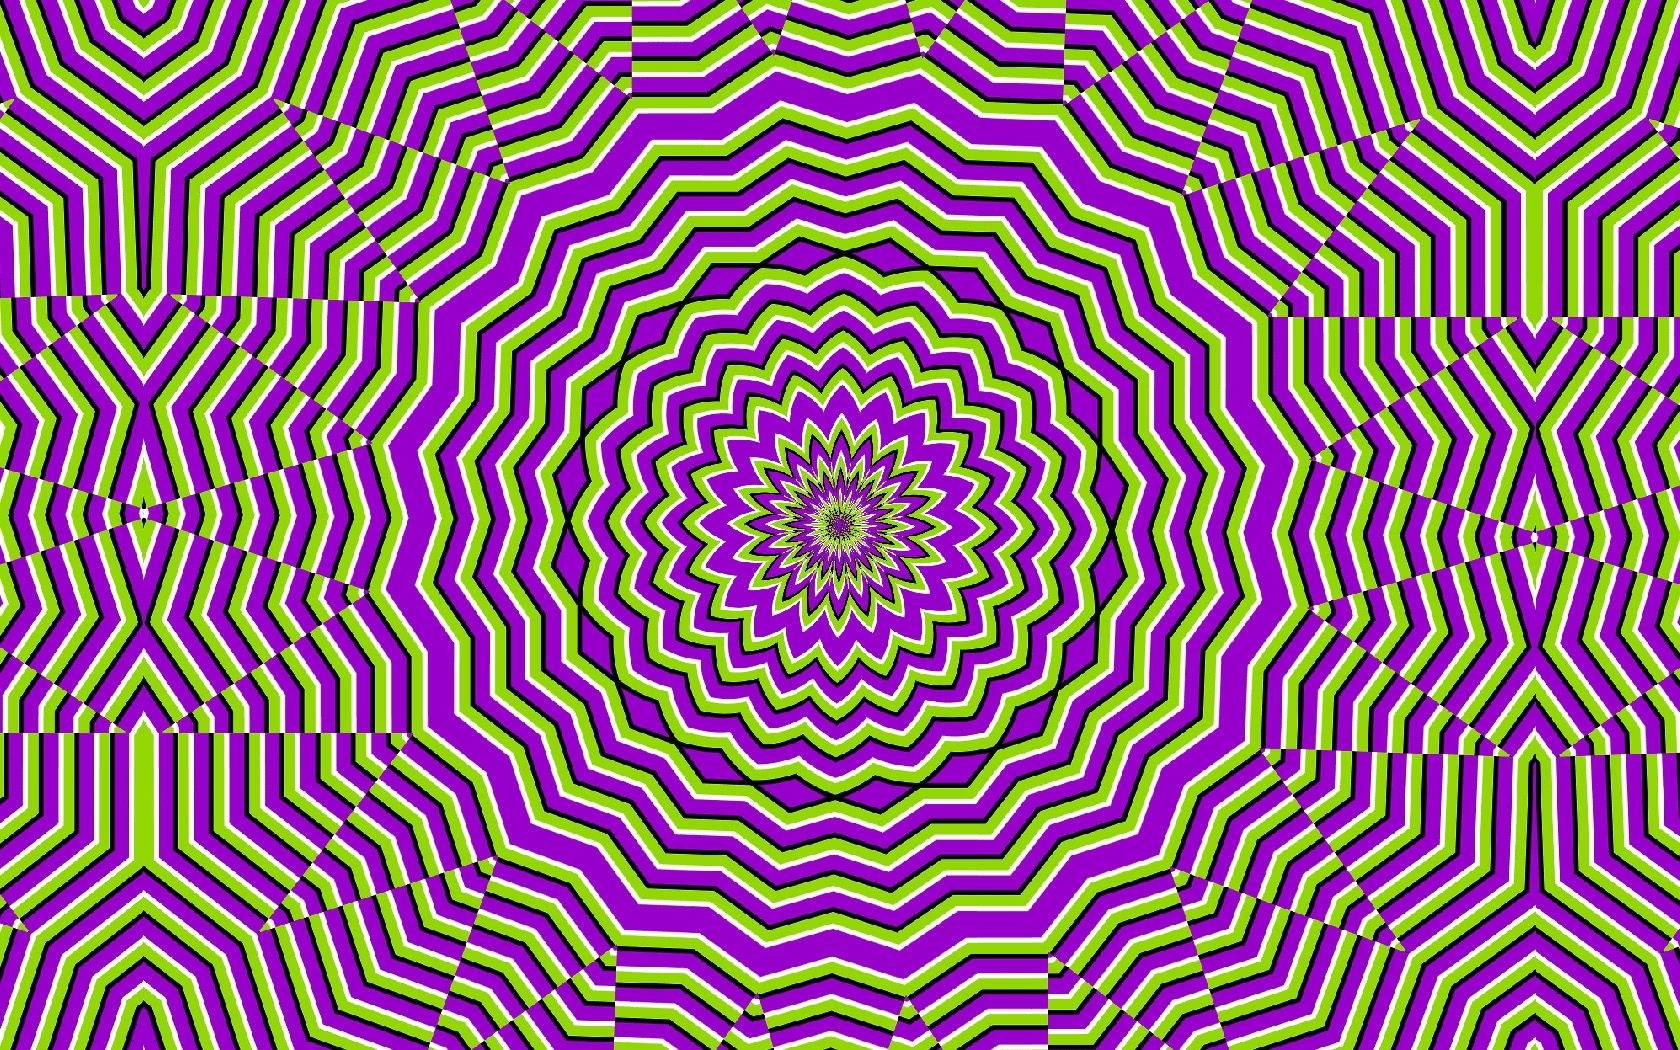 10 Best Moving Optical Illusions Wallpaper FULL HD 1080p For PC Desktop